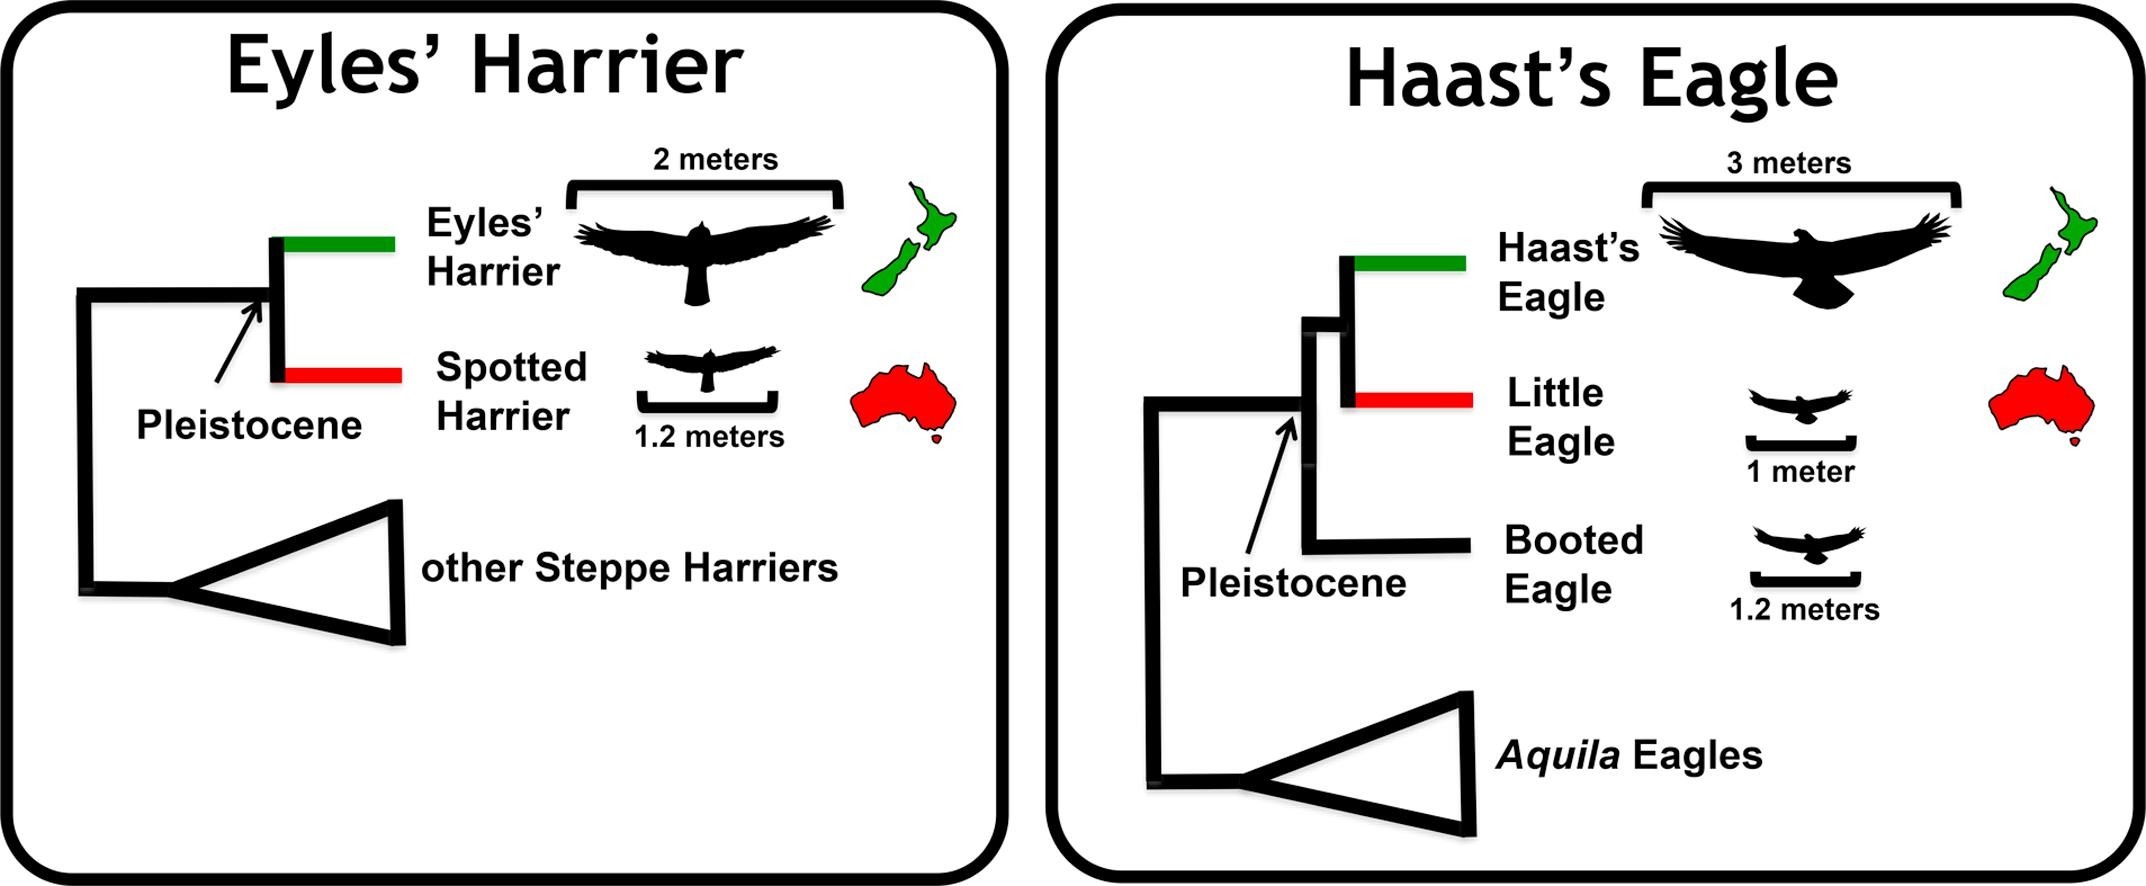 Chart showing the evolution of Eyles' Harrer and  Haast's Eagle